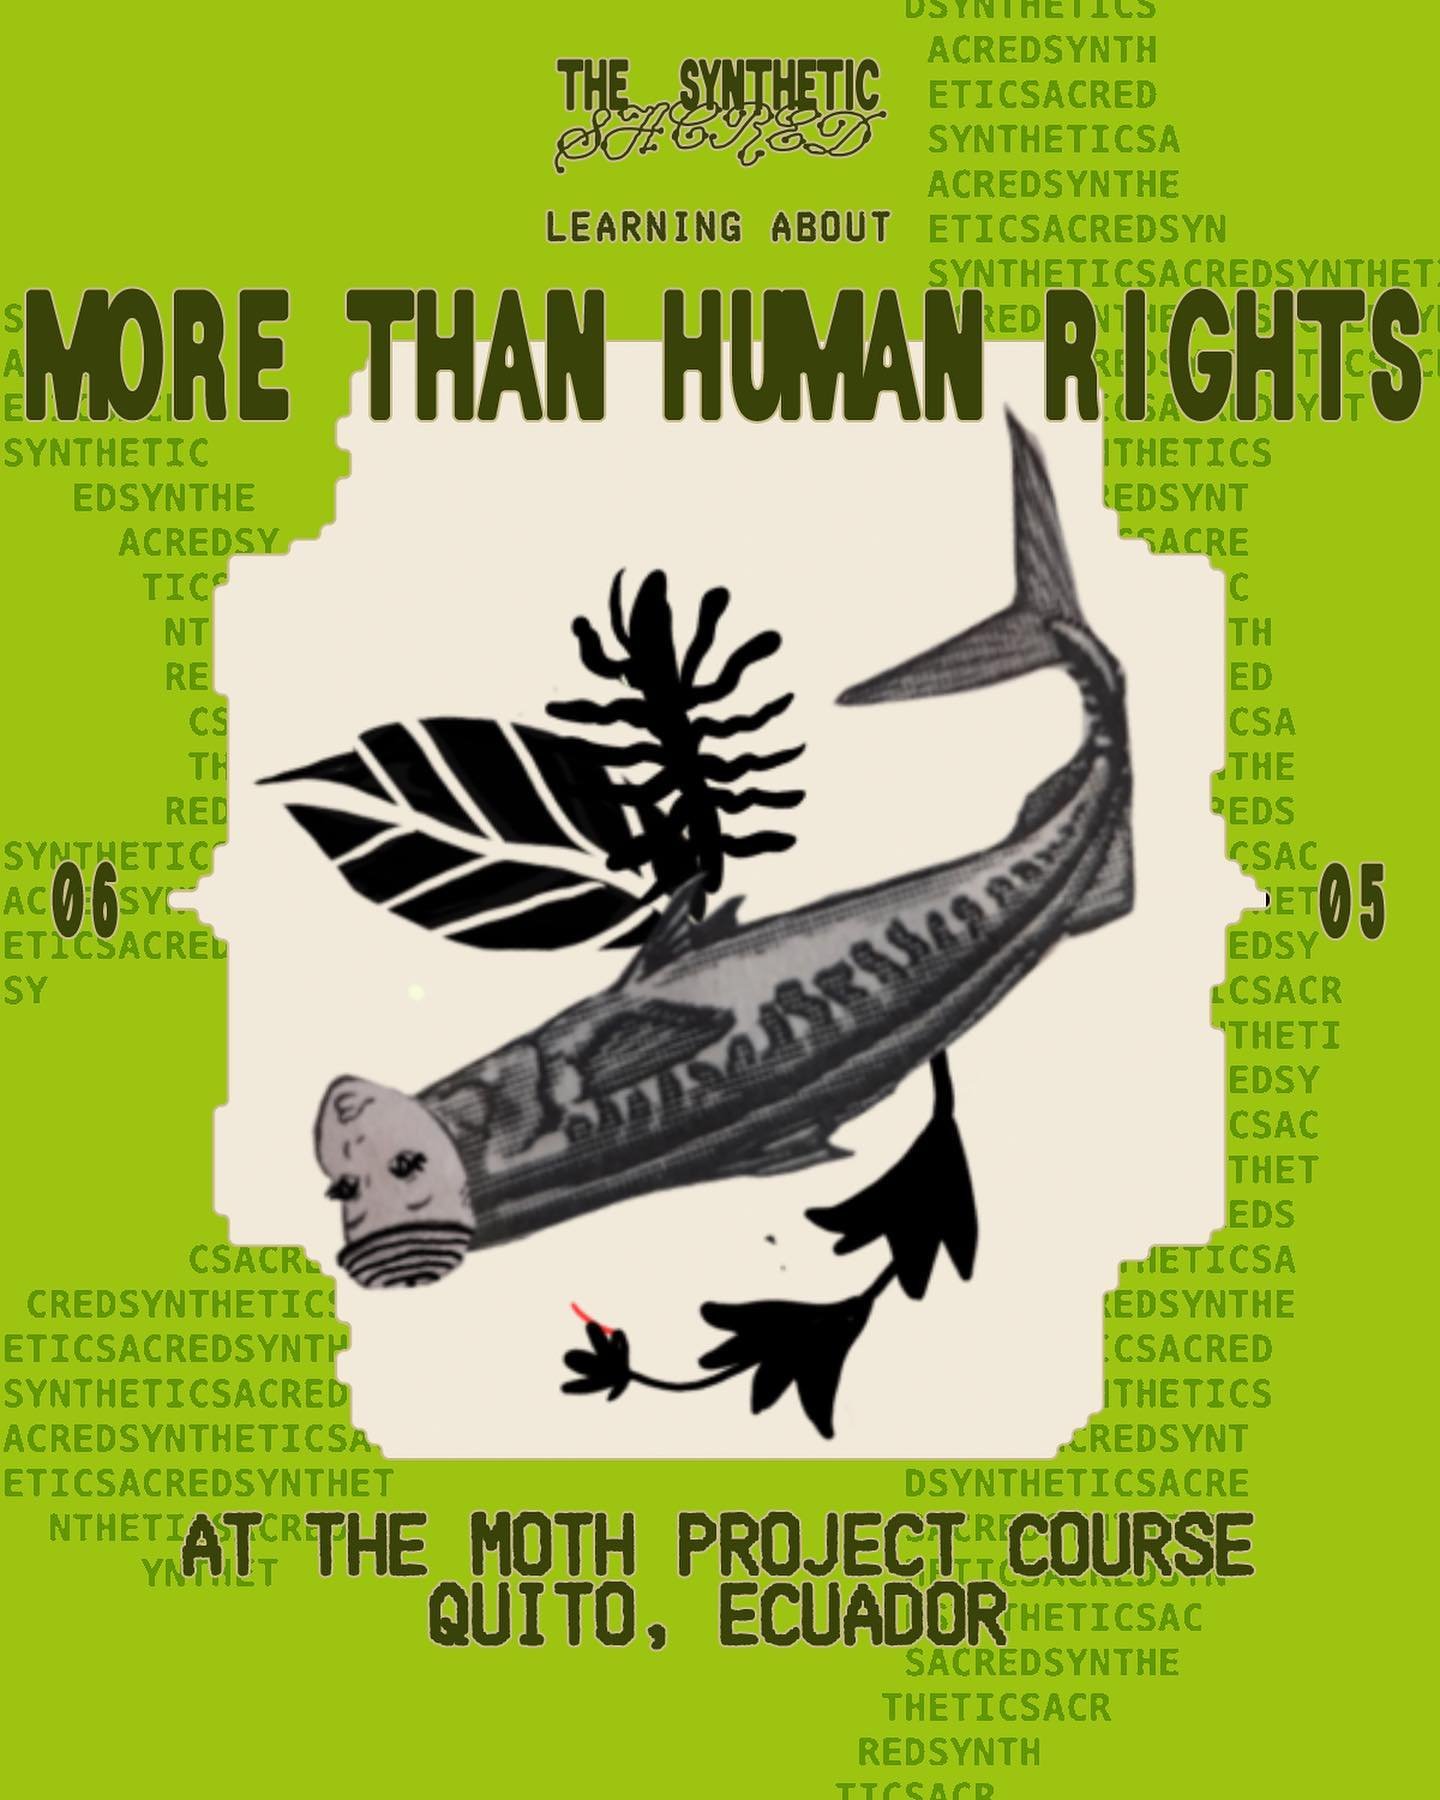 I&rsquo;m really delighted to be be deepening my knowledge and practical understanding of More-Than-Human Rights (MOTH) through participating in the MOTH Project course this week in Quito, Ecuador.

MOTH is part of a growing movement bringing togethe